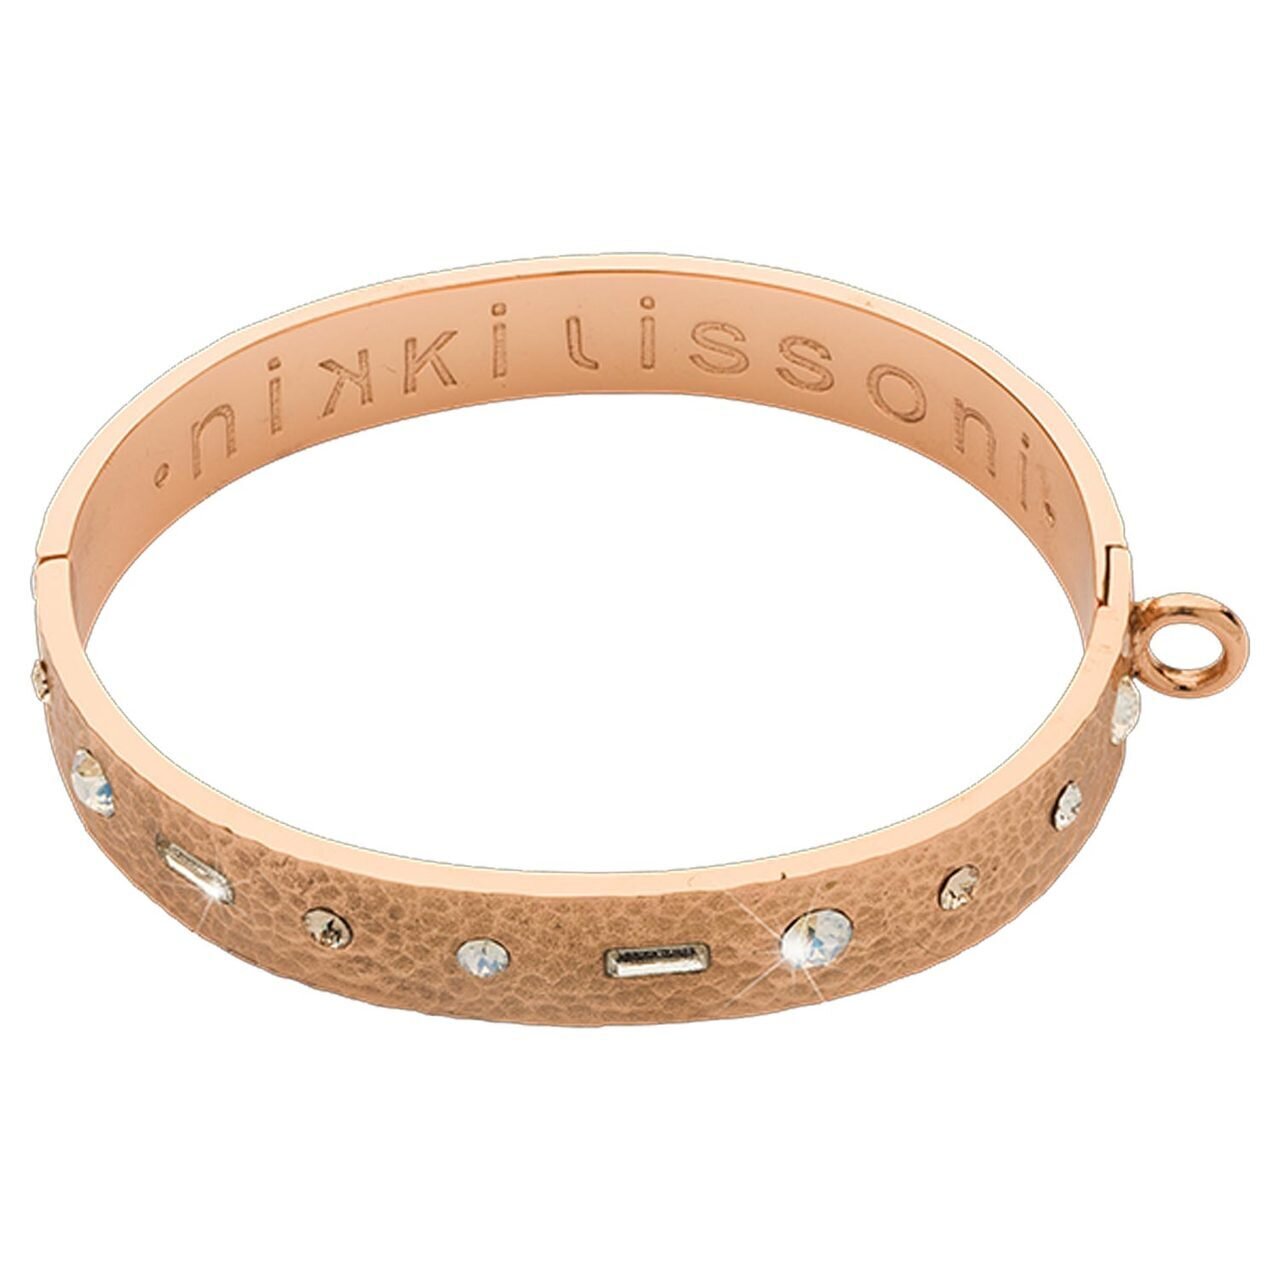 Nikki Lissoni Hammered Bangle of 14mm Swarovski Crystals One Loop To Attach A Charm Rose Gold-plated 21cm B1161RG21